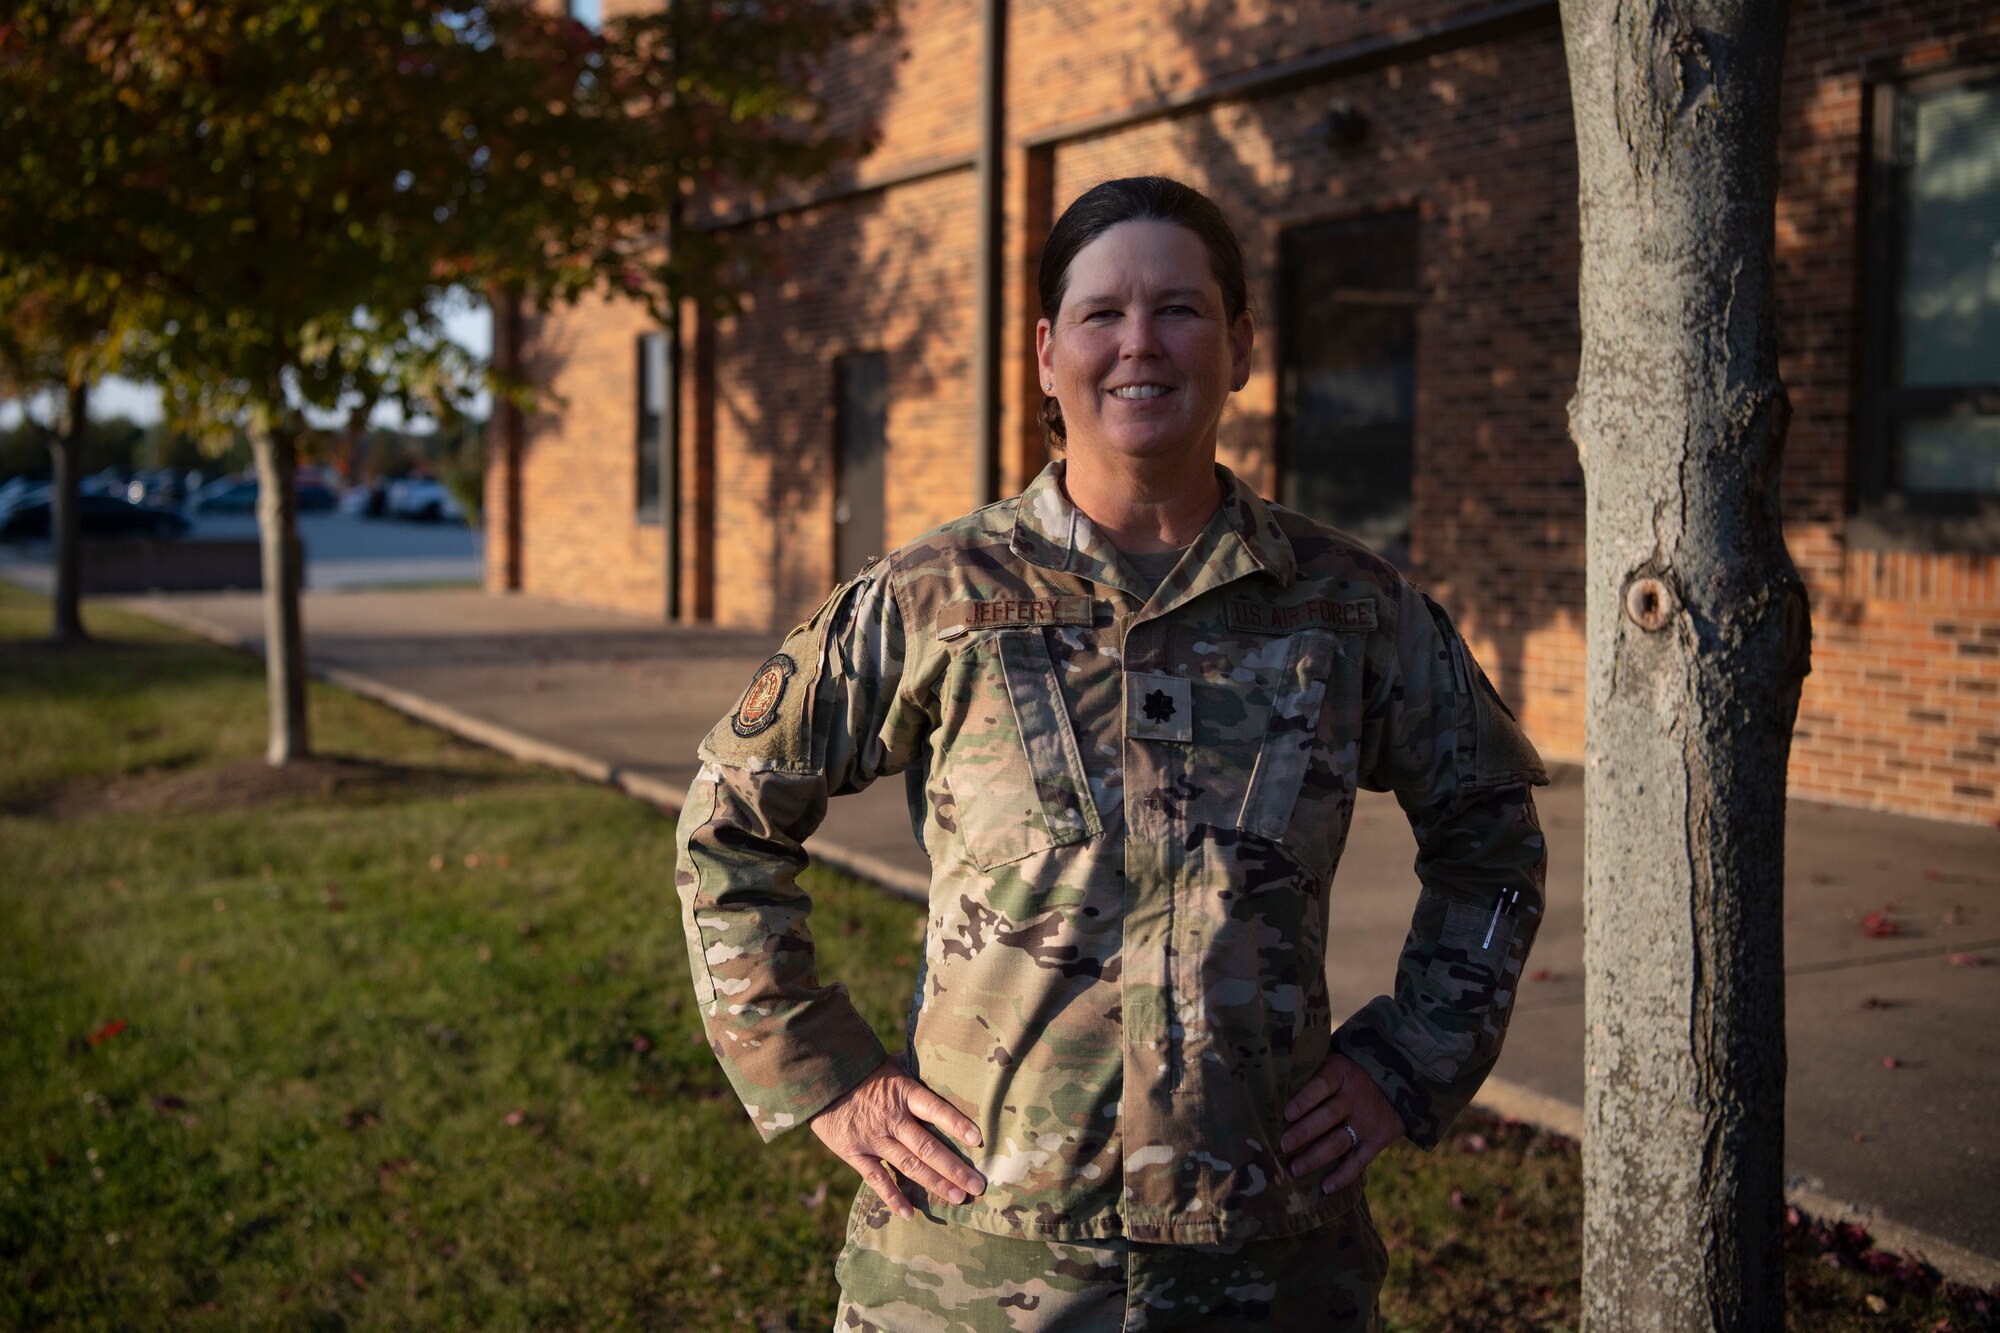 Linda Jeffery, 434th Force Support Squadron operations officer, won 1st place in the women’s category in Armed Forces Golf Championship. (U.S. Air Force photo by Staff Sgt. Michael Hunsaker)